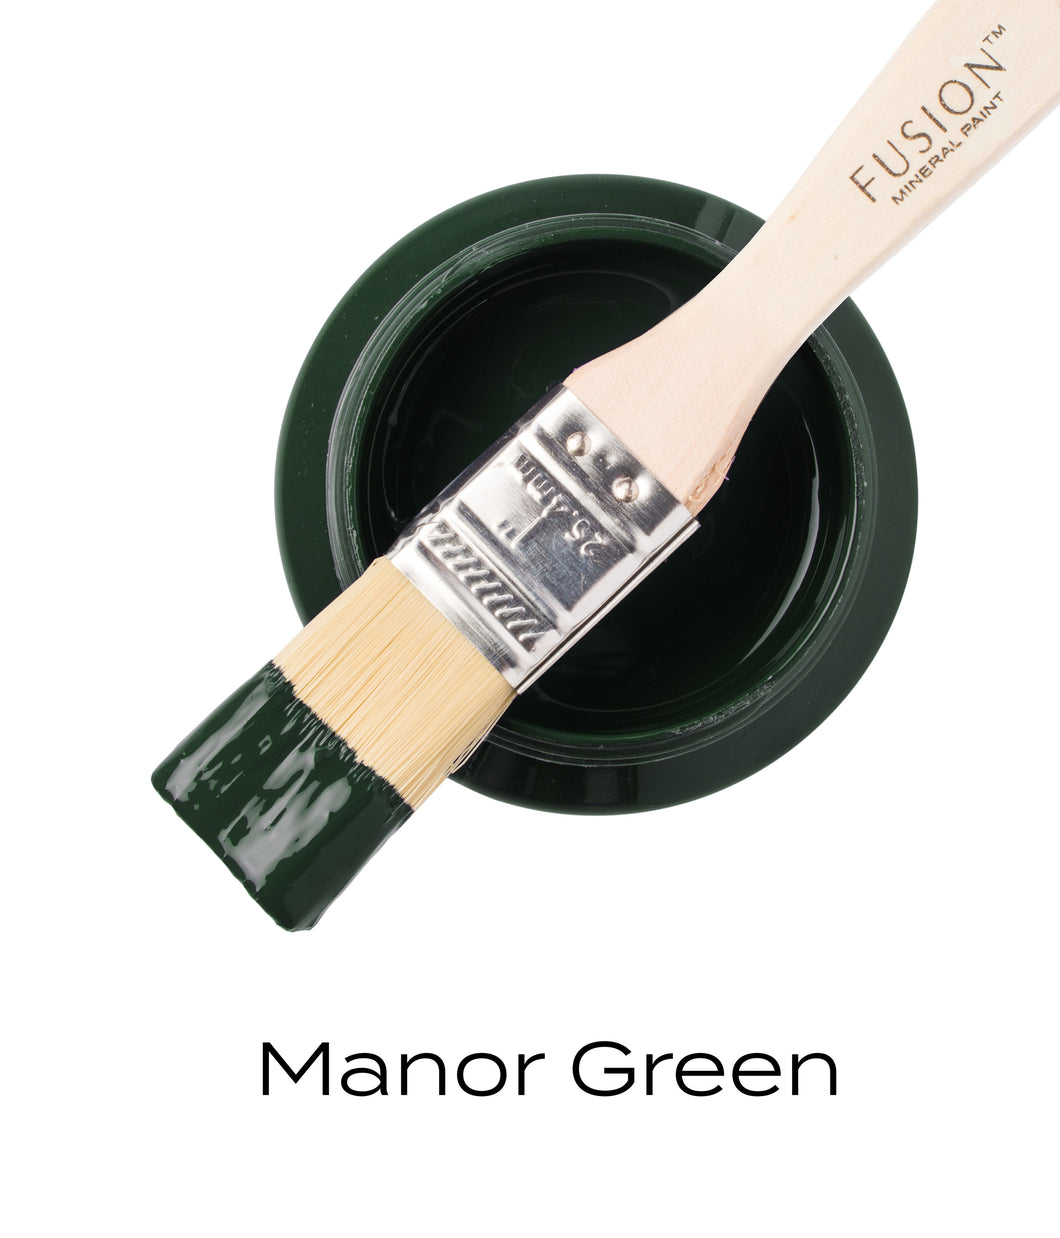 Fusion Mineral Paint Manor Green 500g